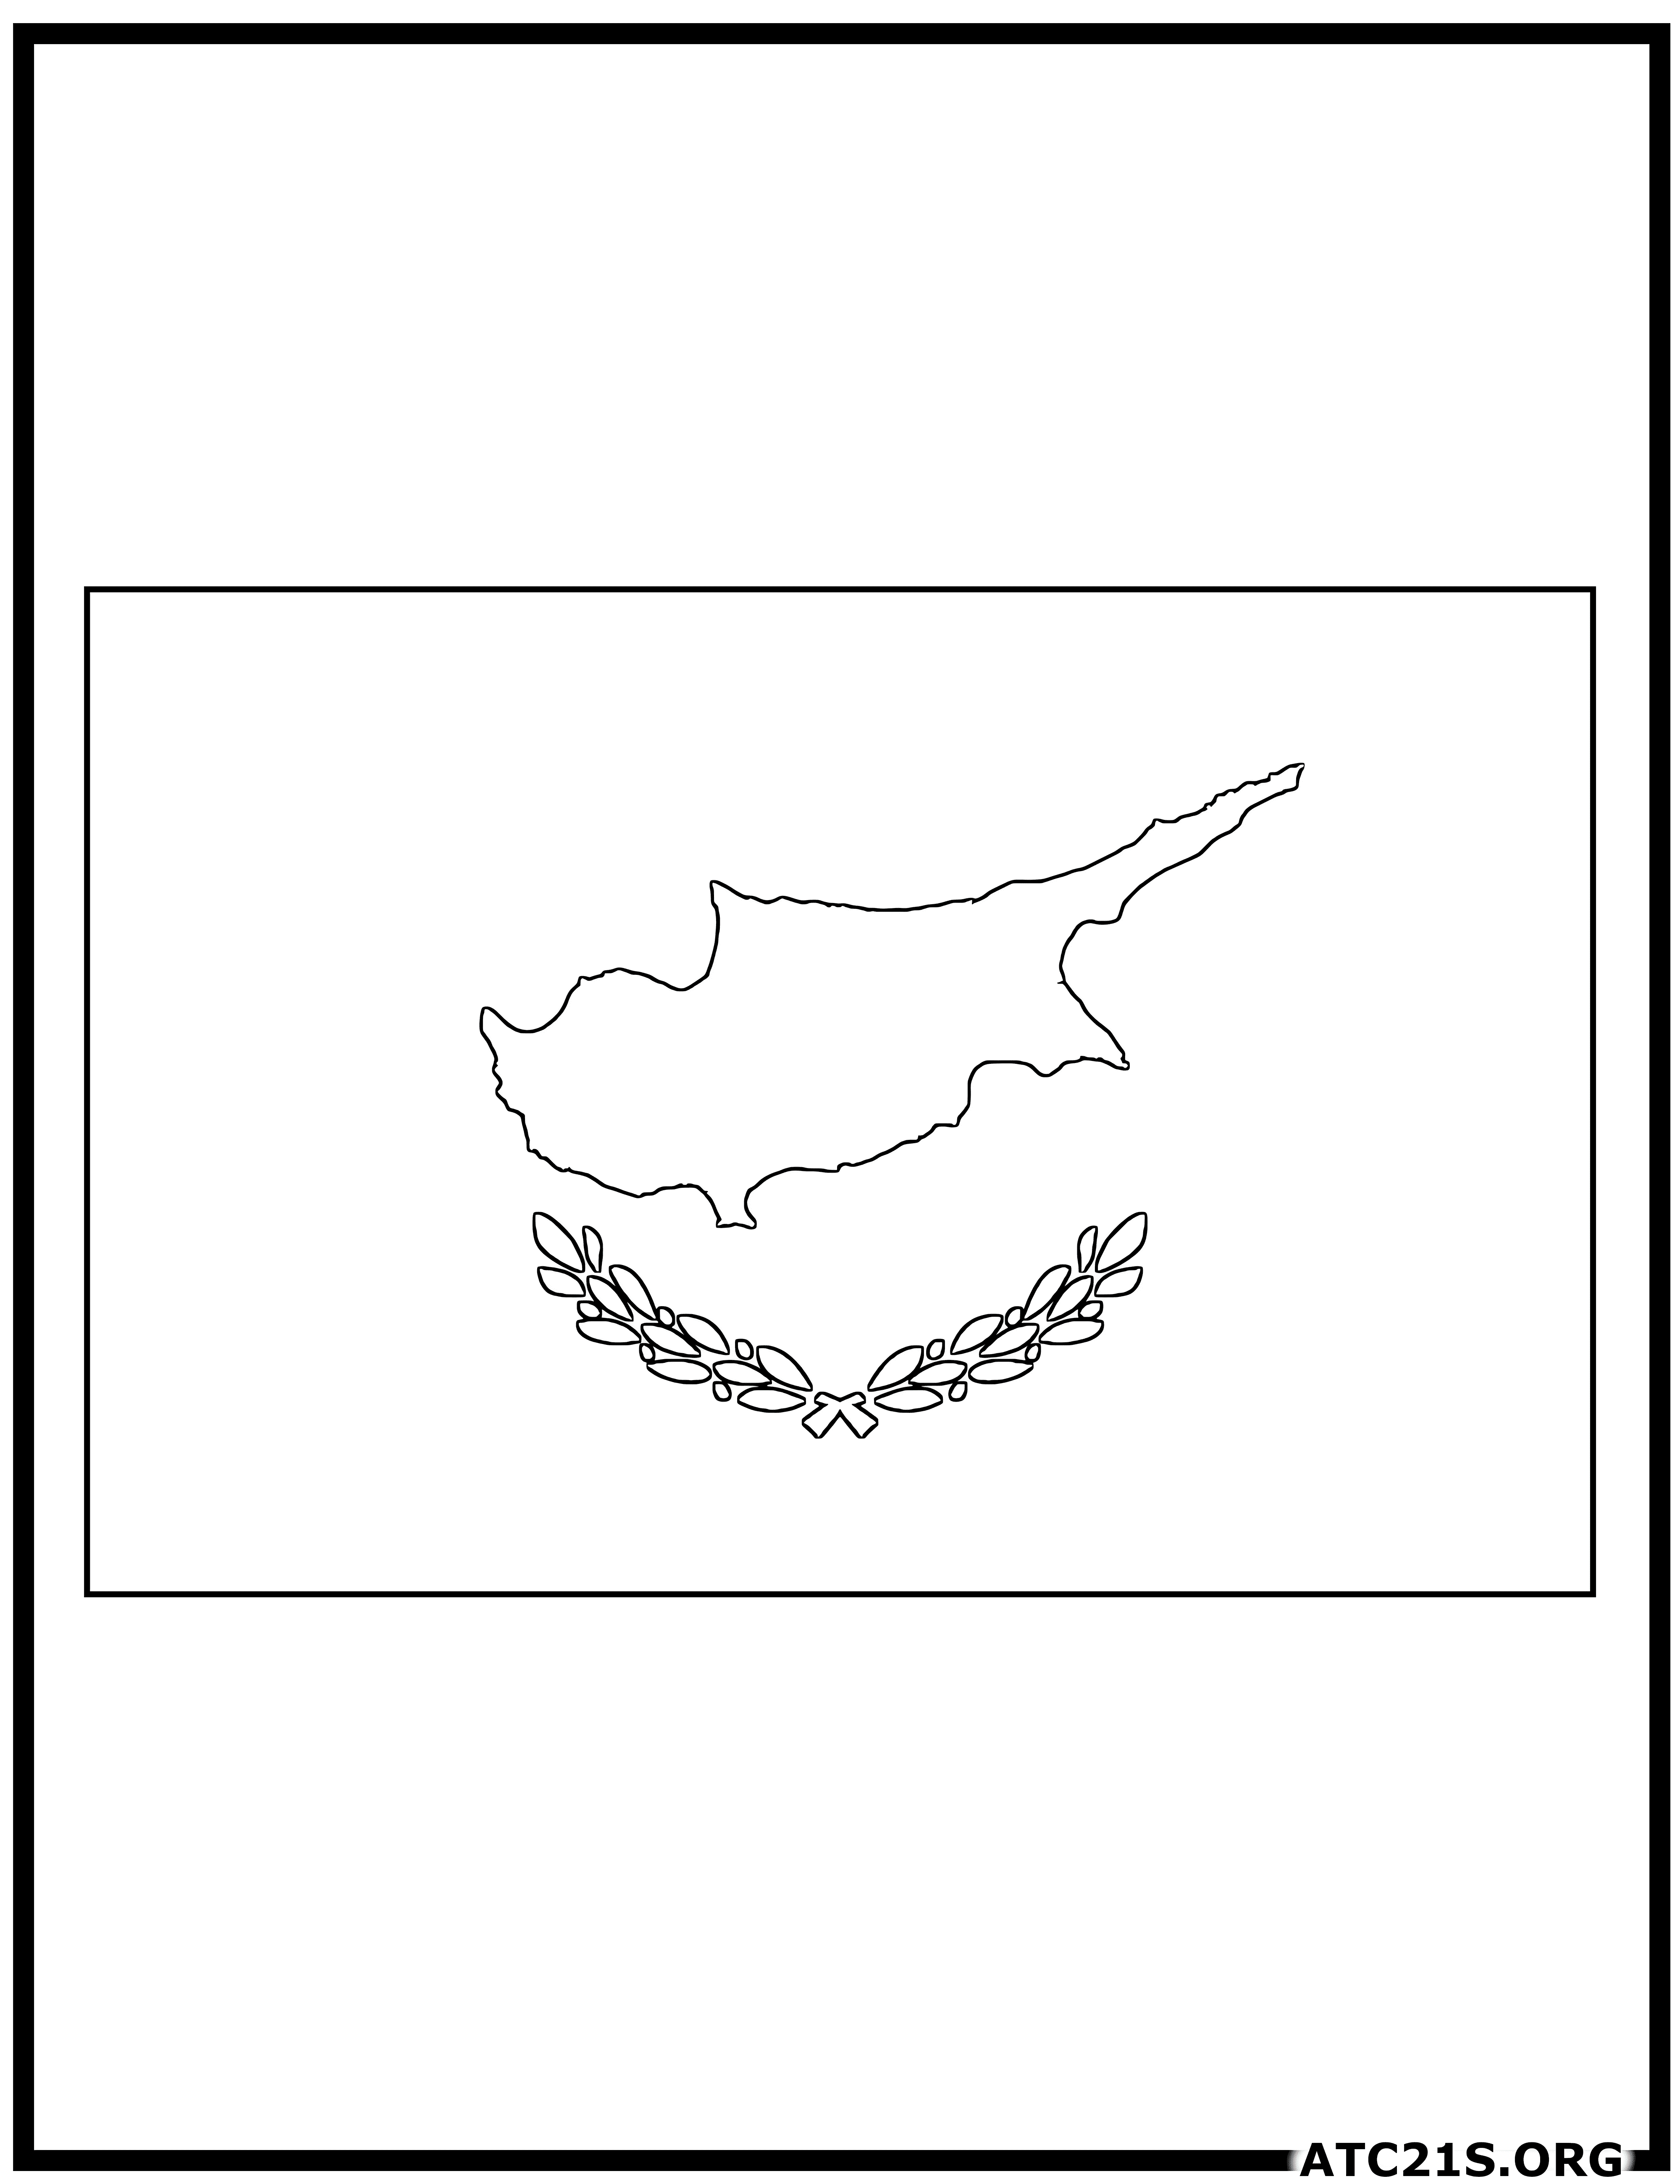 Cyprus_flag_coloring_page